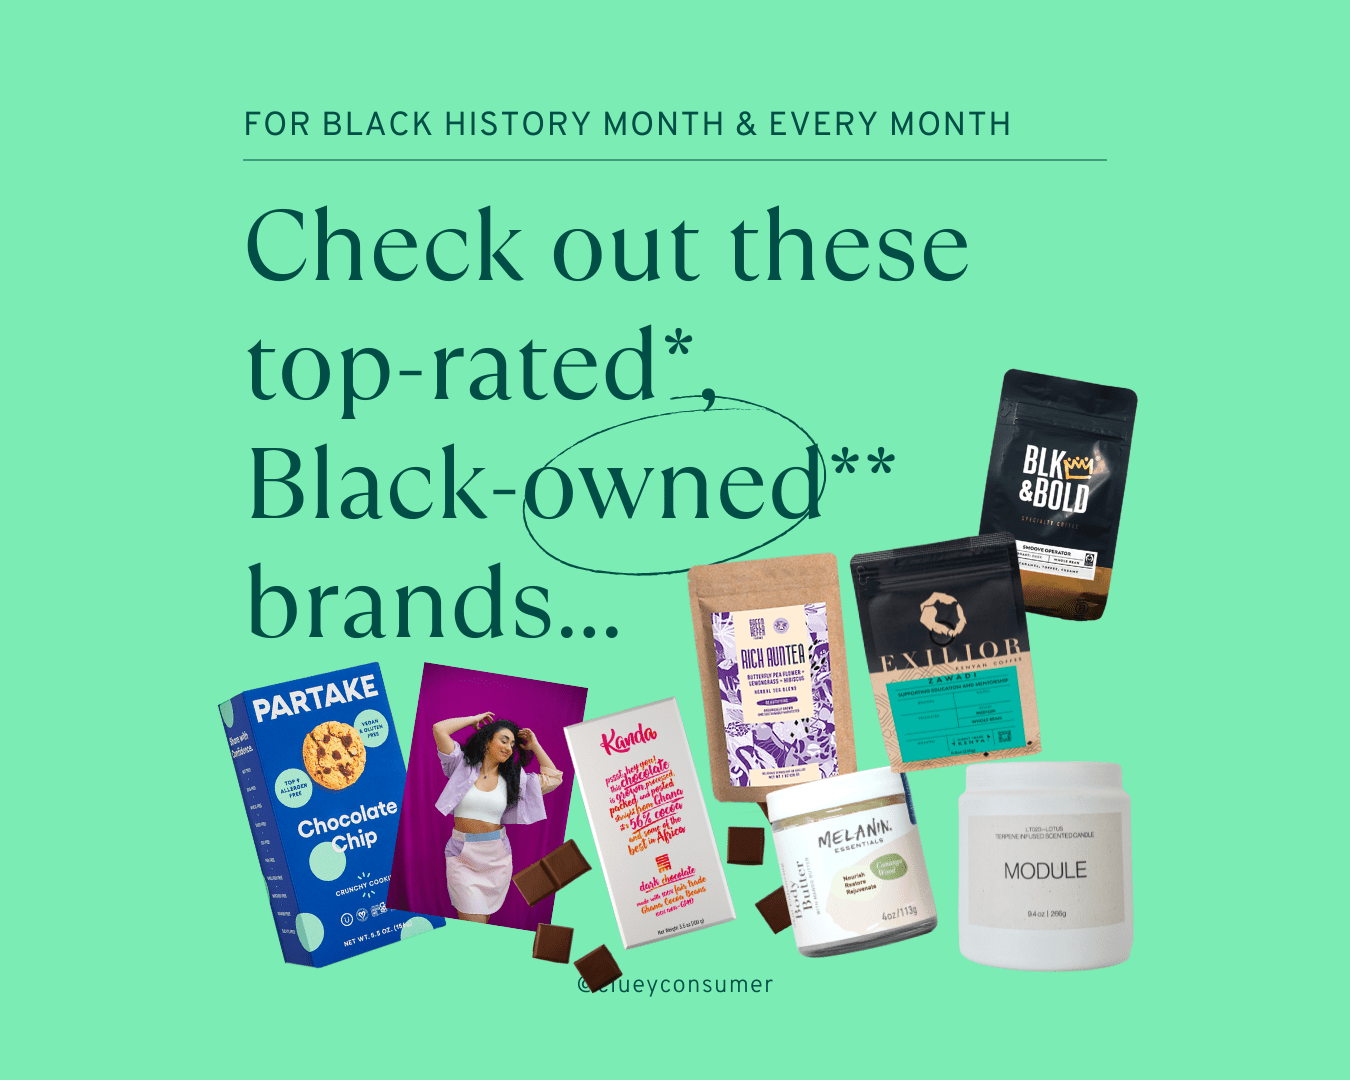 February is Black History Month: Check out these top-rated, Black-owned brands this month and every month